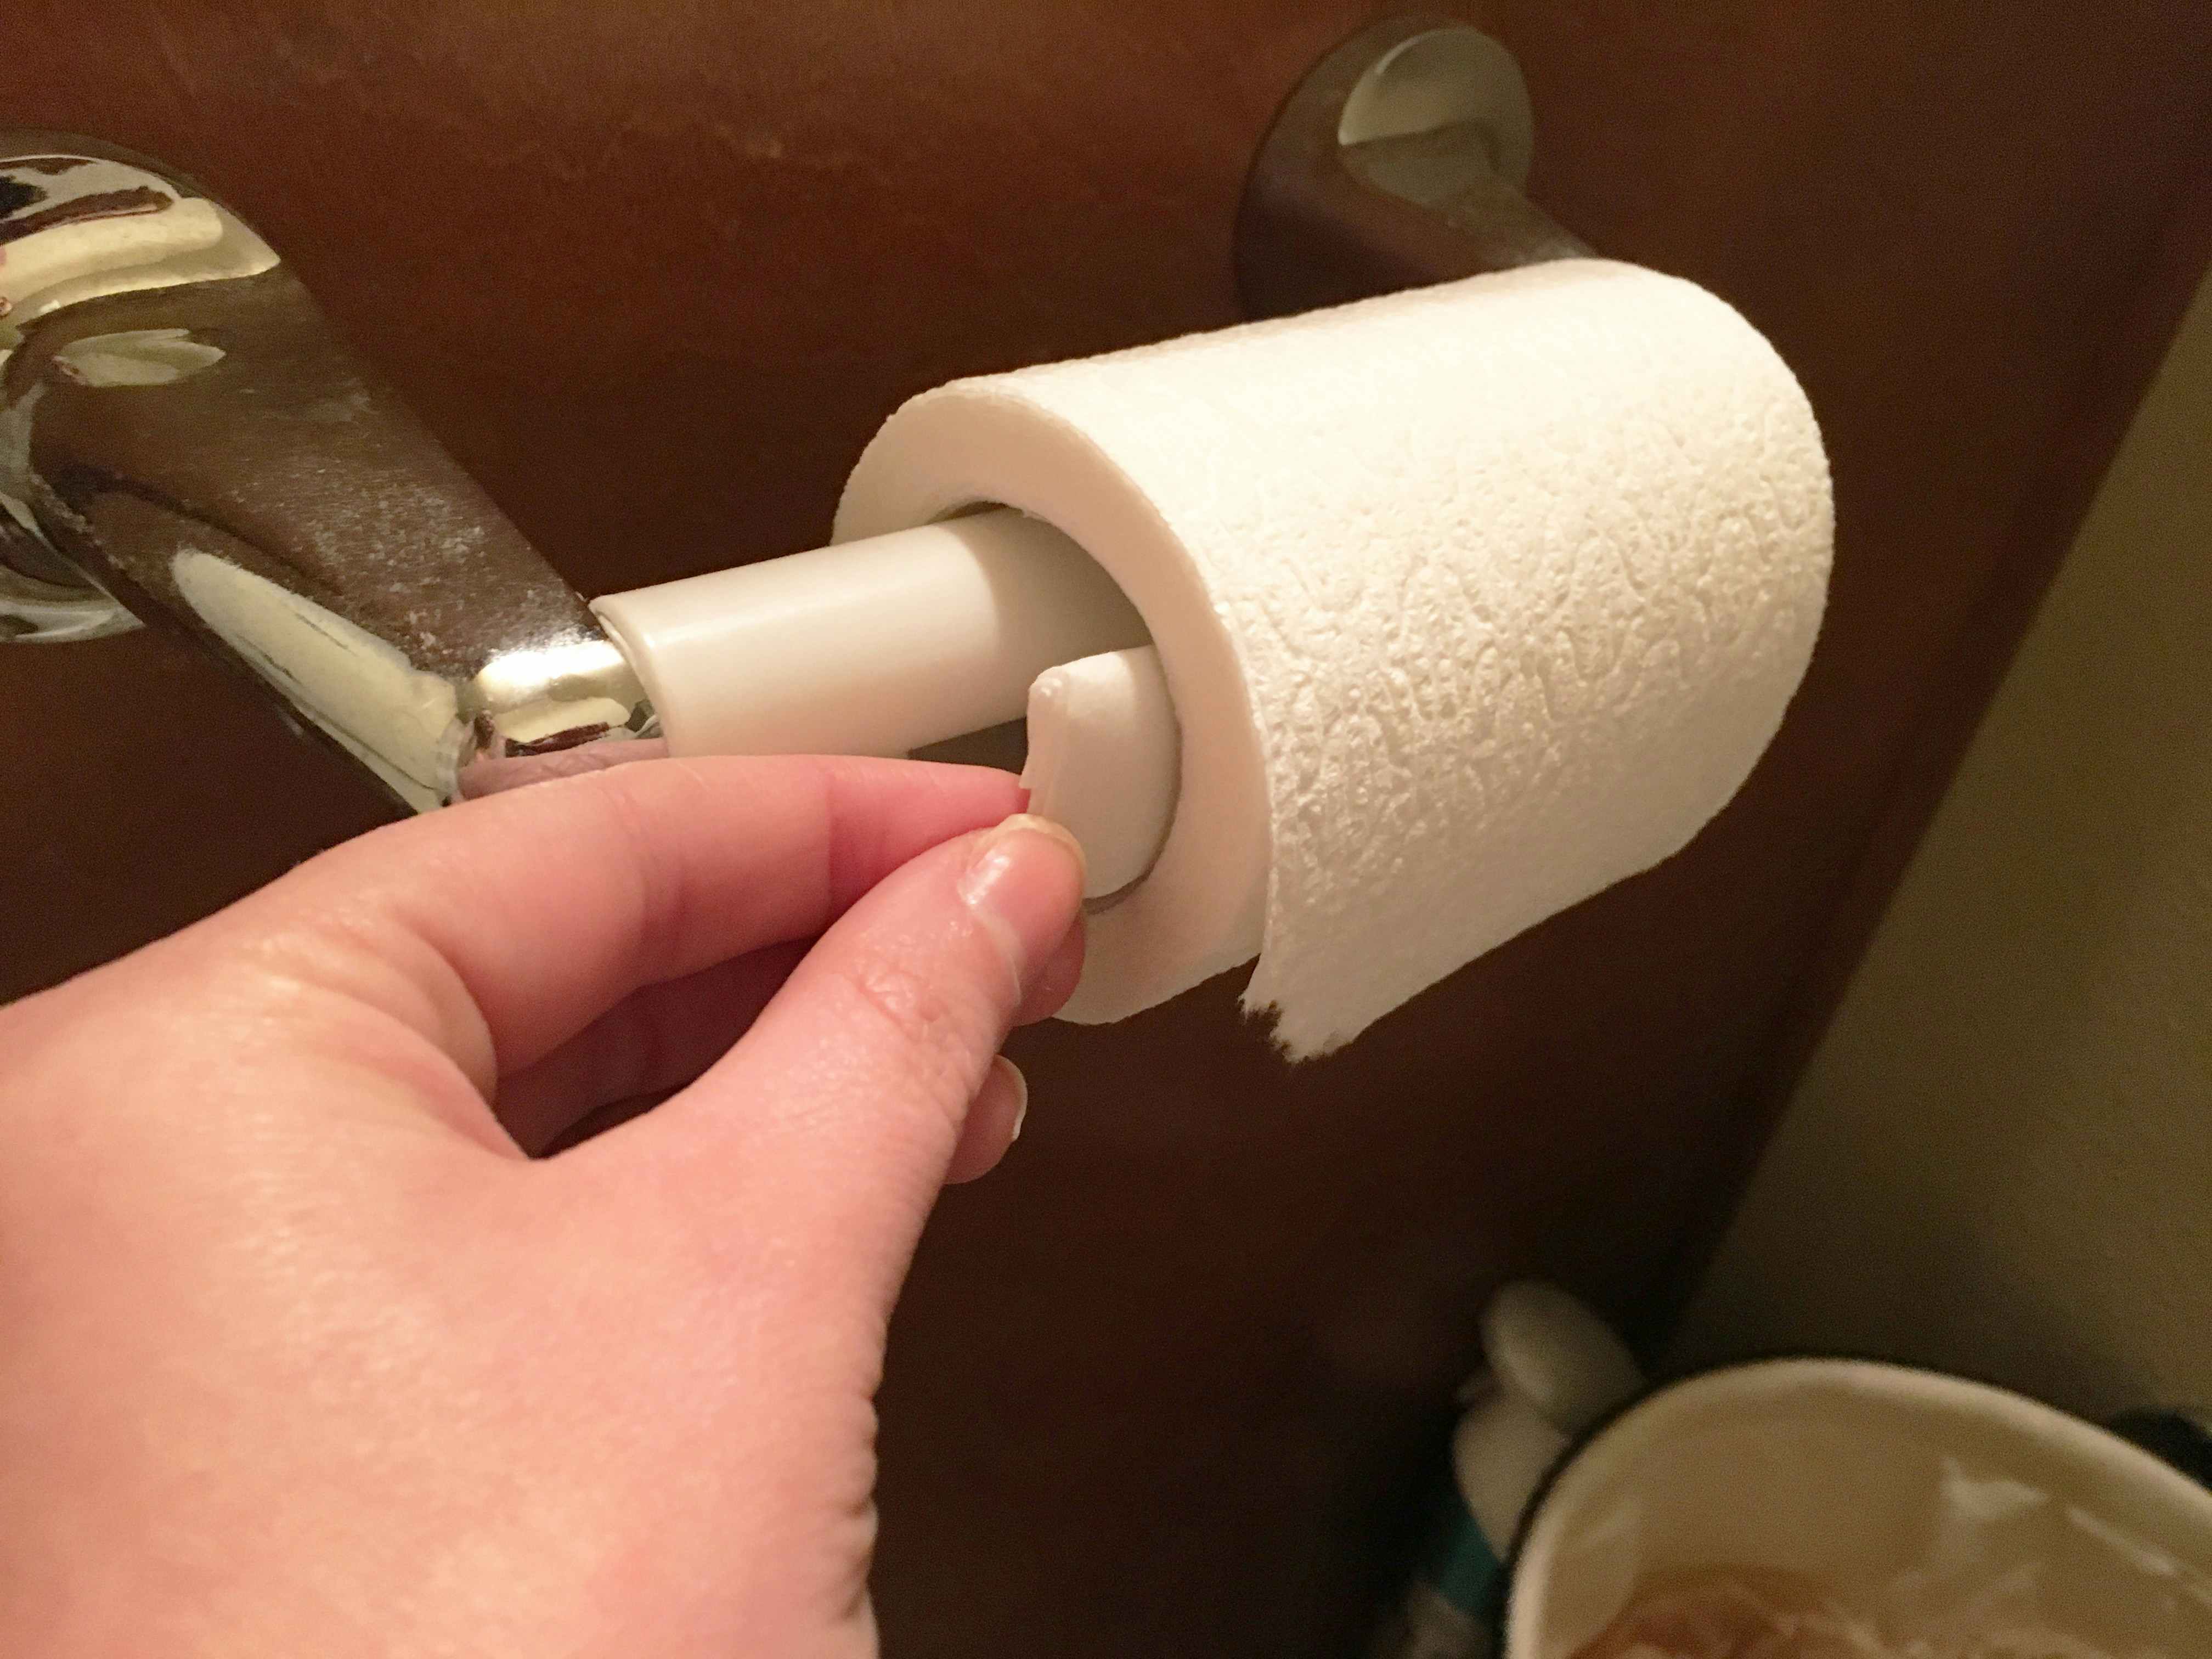 Set in a toilet paper roll for a fresh-smelling bathroom.